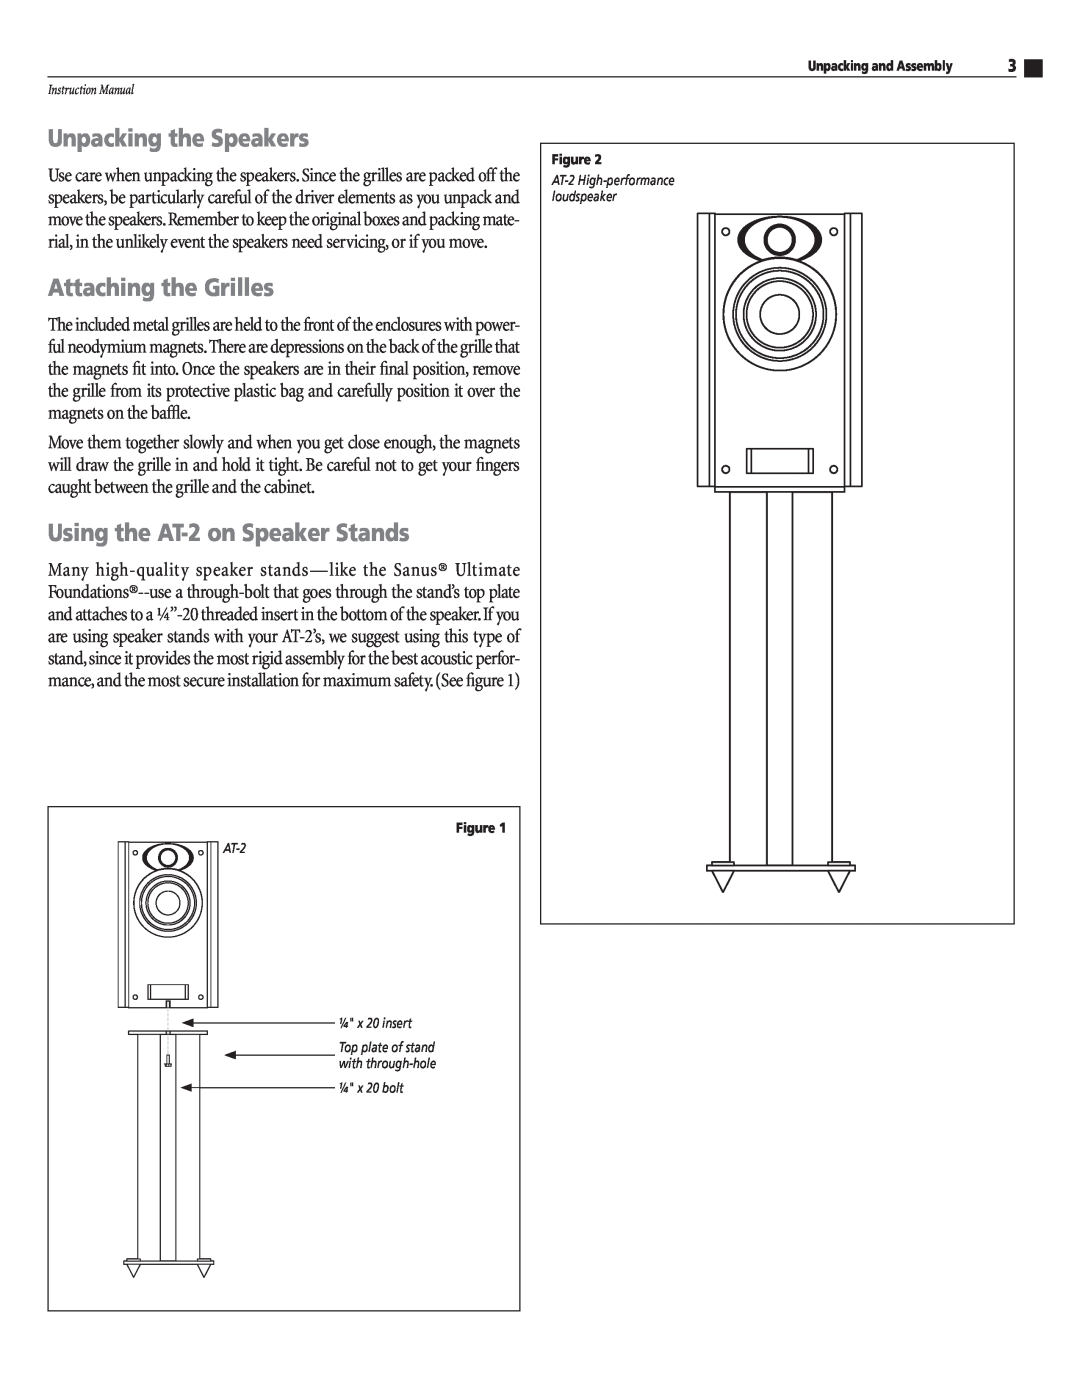 Atlantic Technology instruction manual Unpacking the Speakers, Attaching the Grilles, Using the AT-2on Speaker Stands 